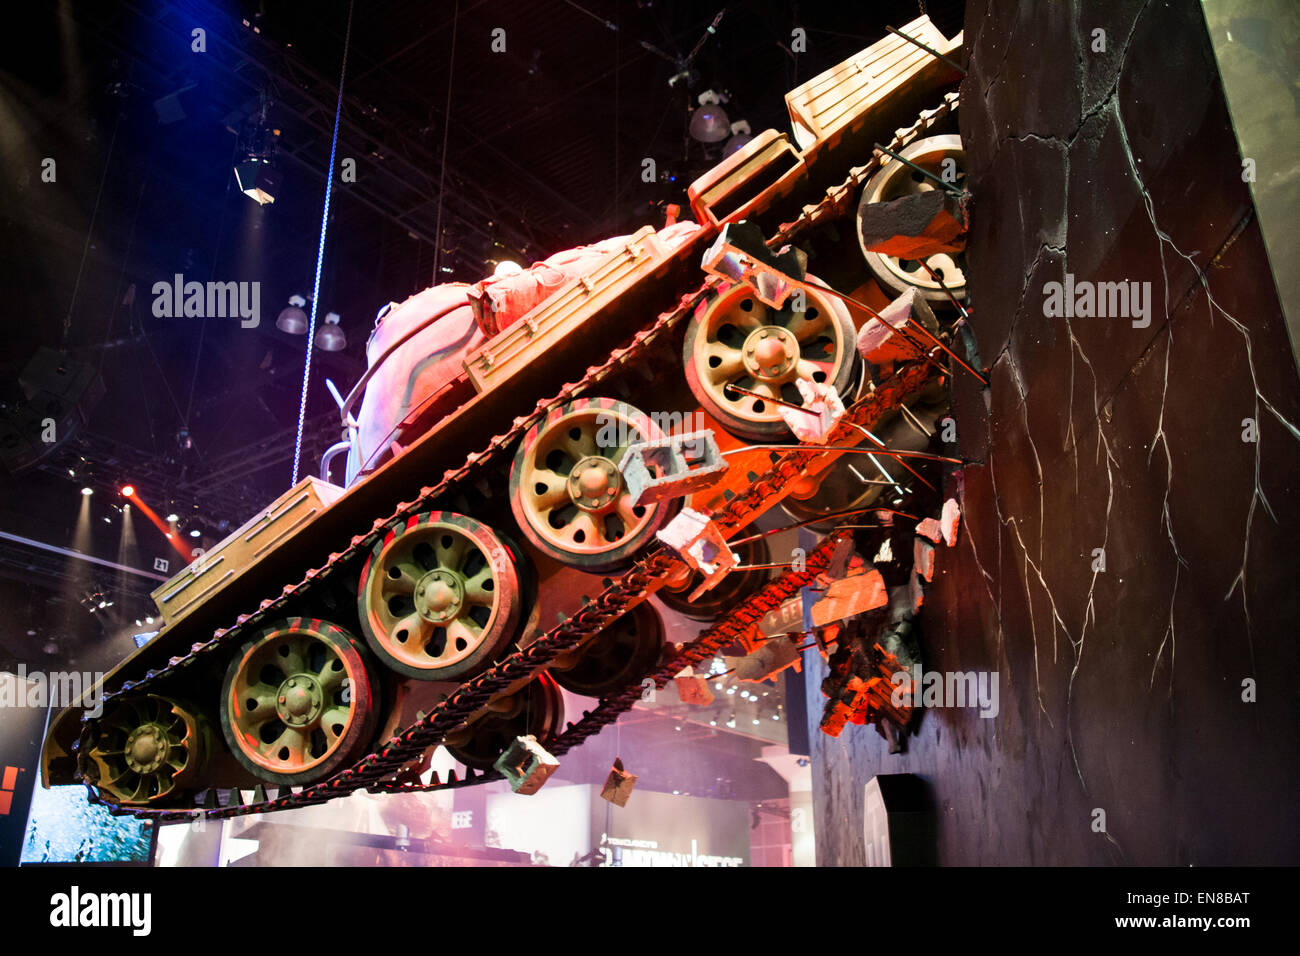 A life size replica of a World War 2 Tank from the video game World Of Tanks hangs from the ceiling at the 2014 E3 Expo. Stock Photo